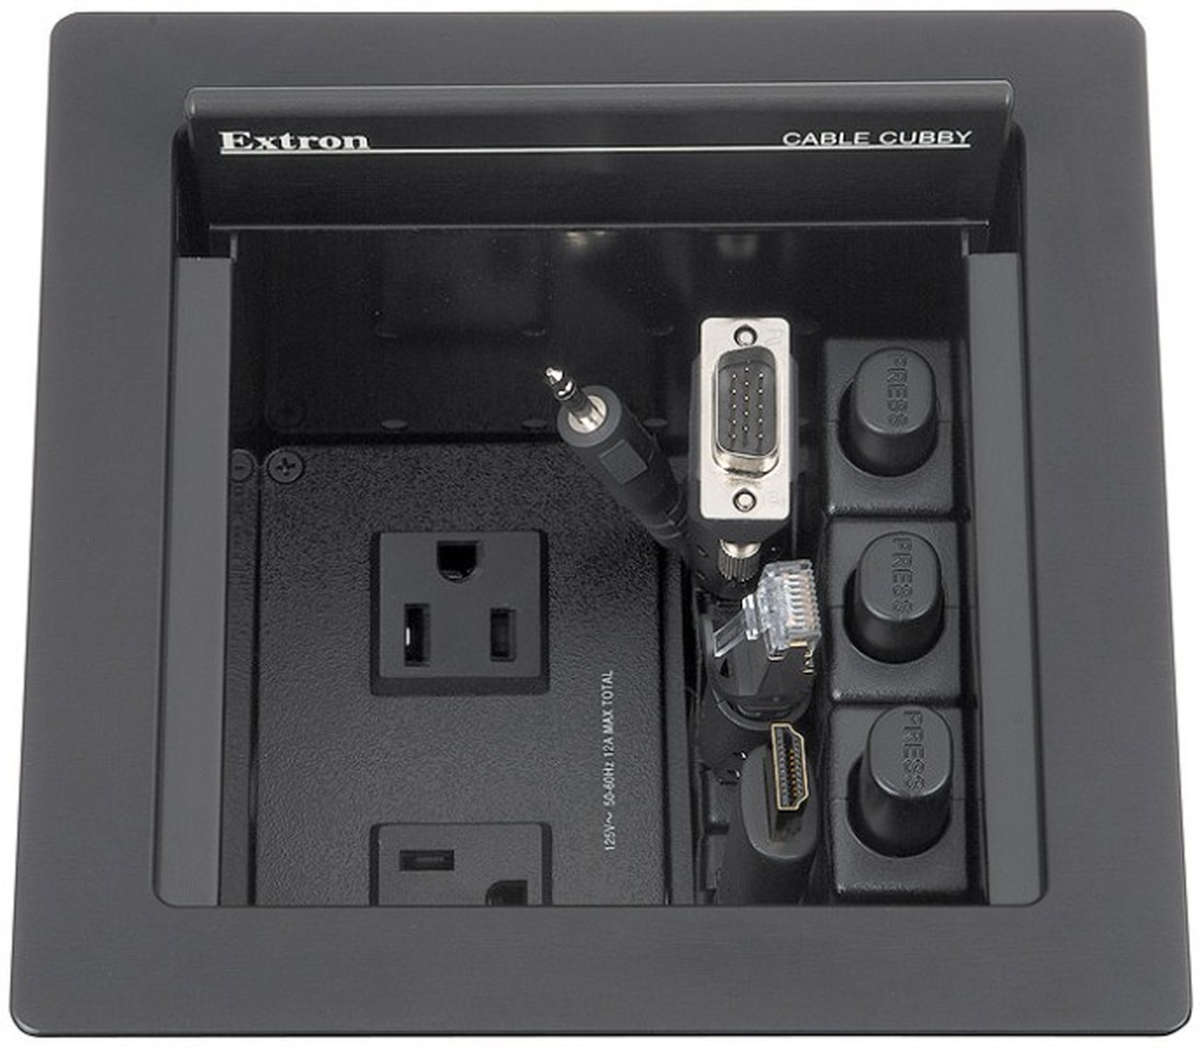 Extron Cable Cubby 500 70-1045-02  product image